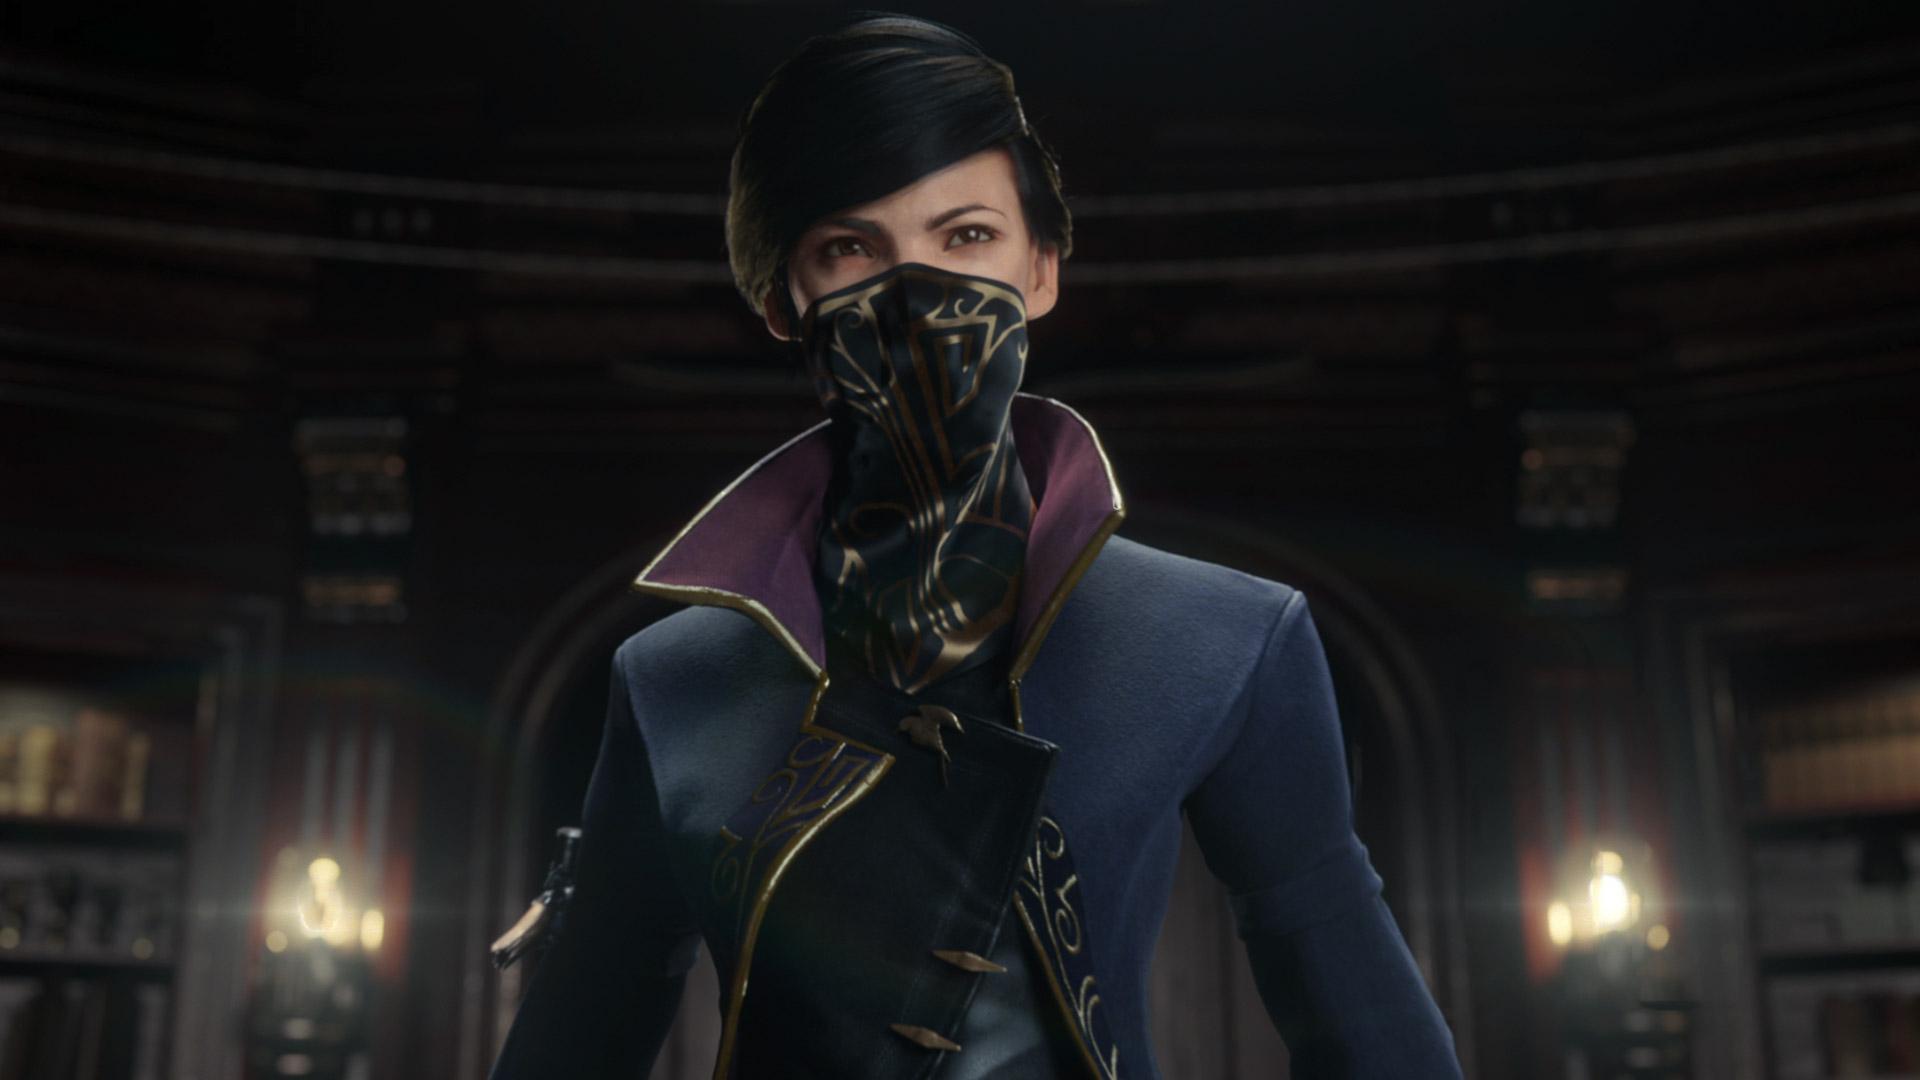 Dishonored 2 wallpaper 1